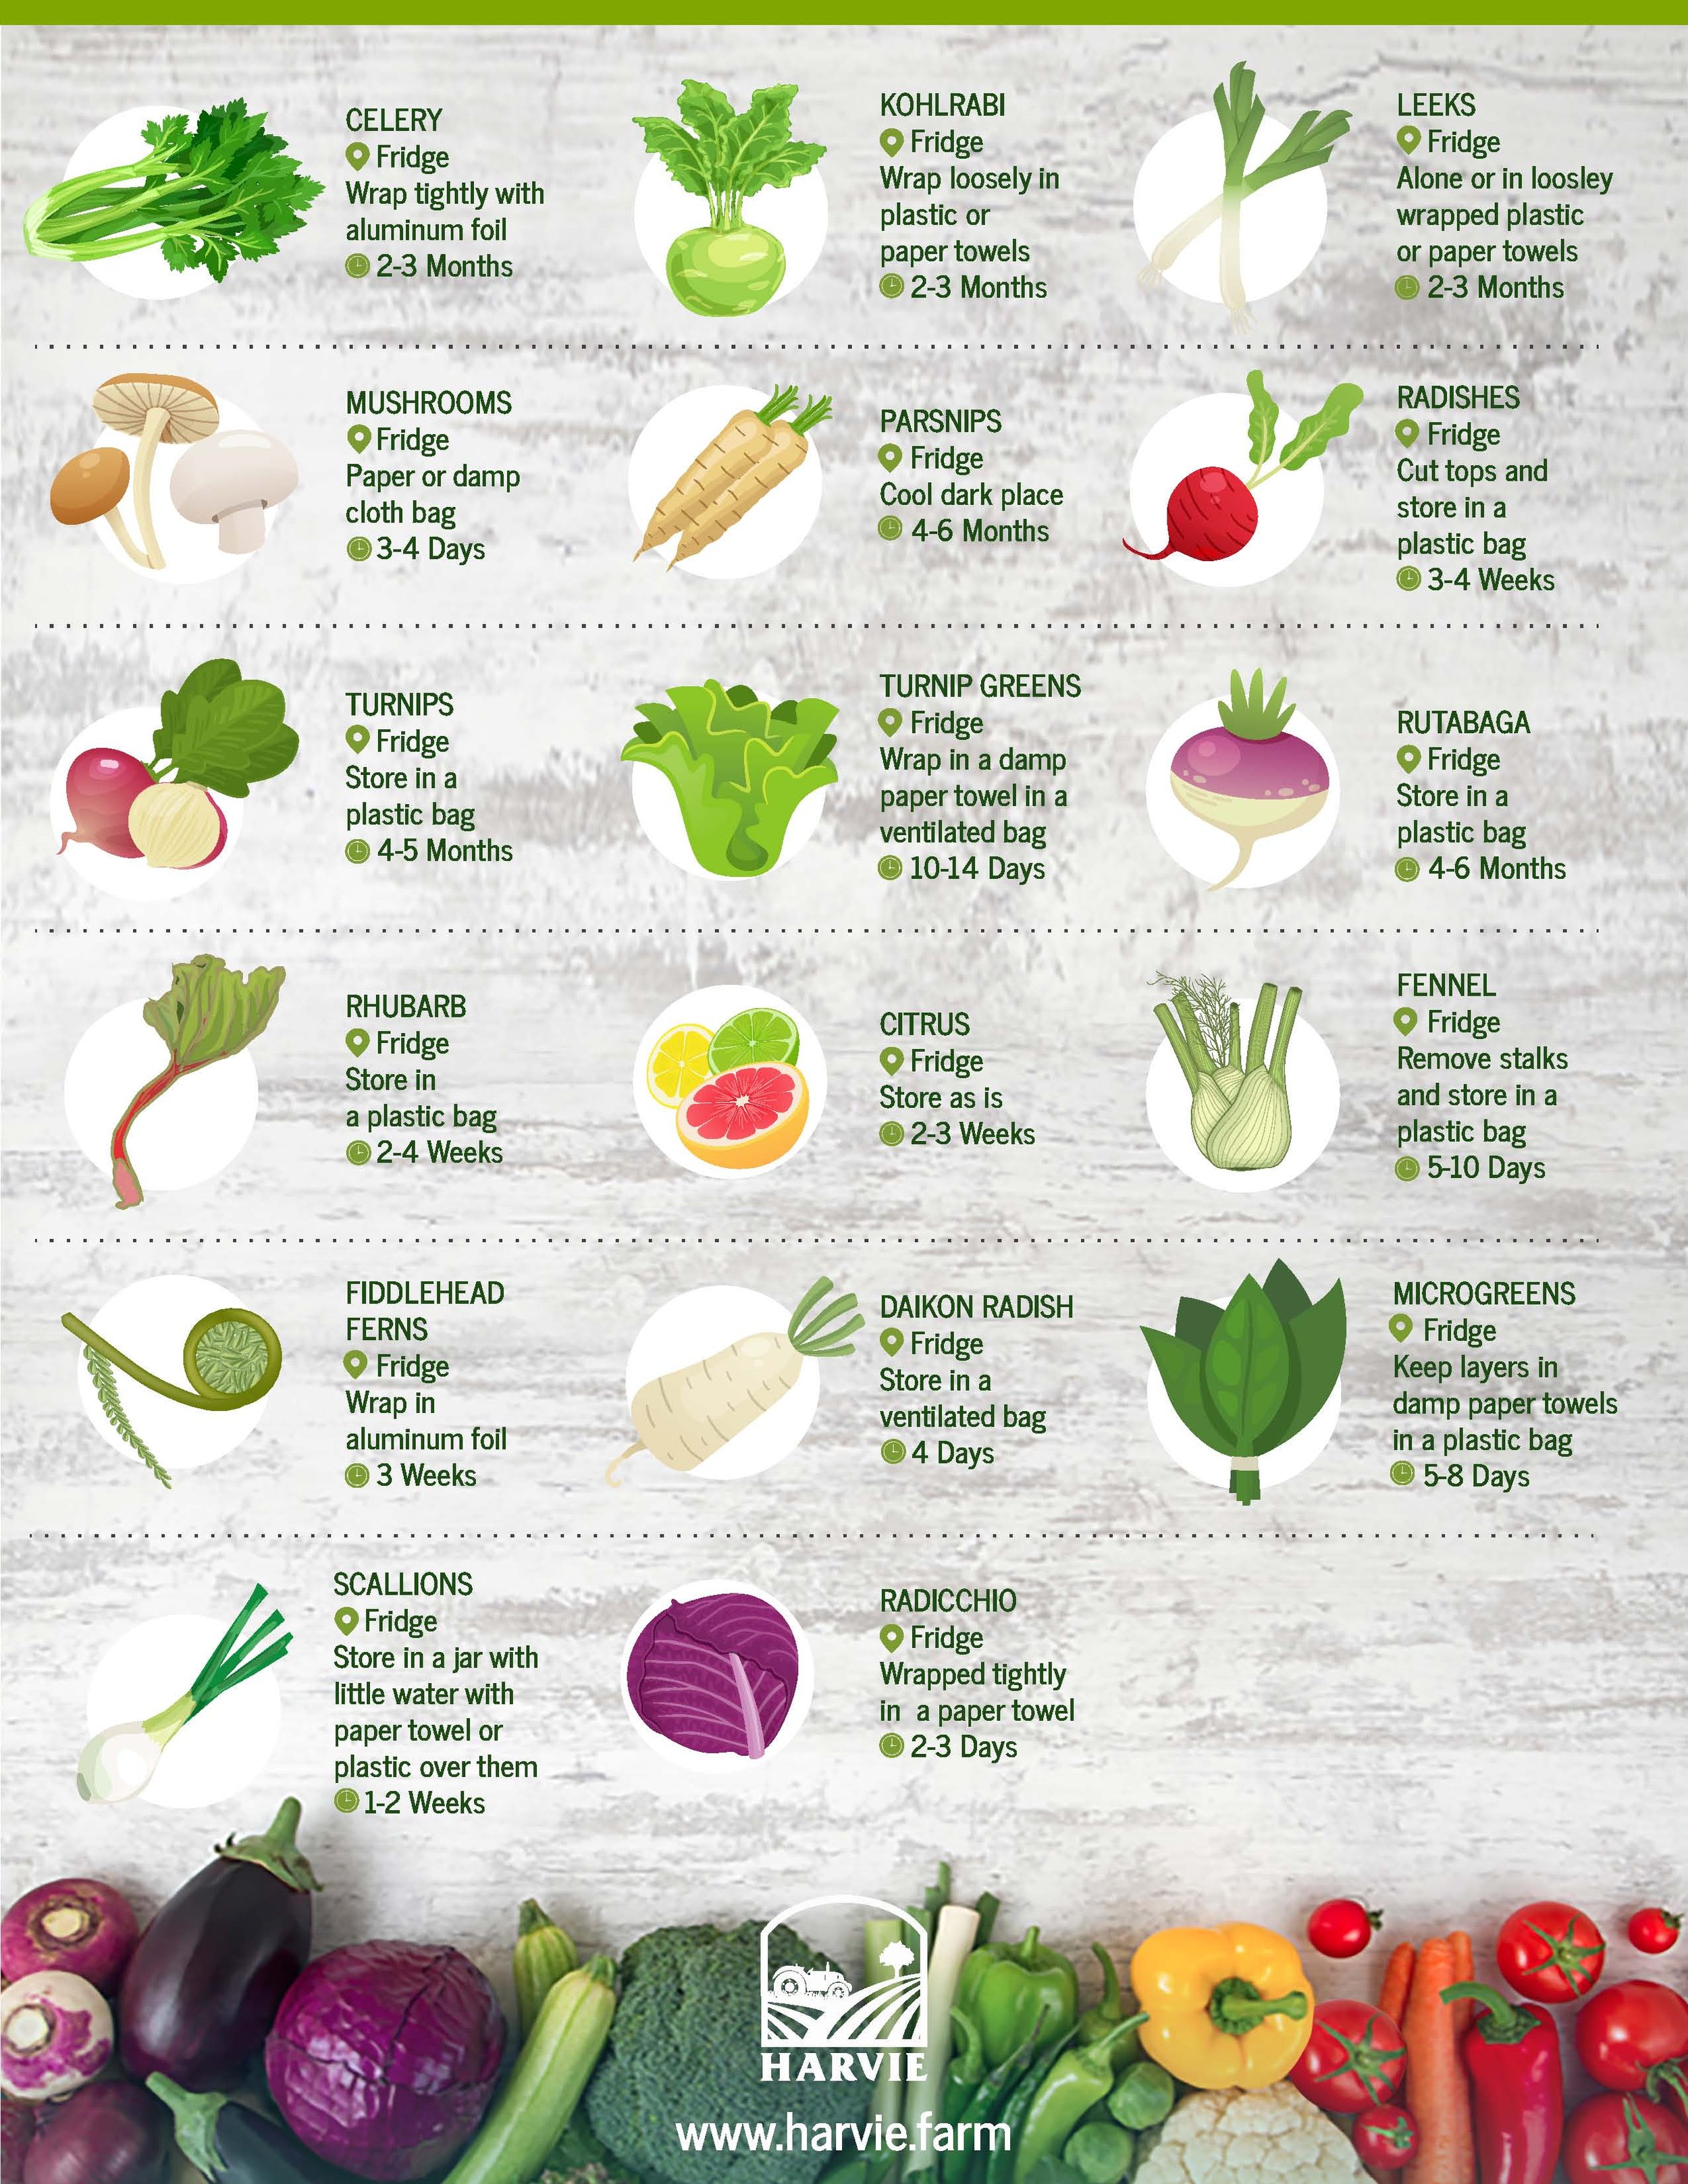 7 Tips to Get the Most Out of Bagged Veggies